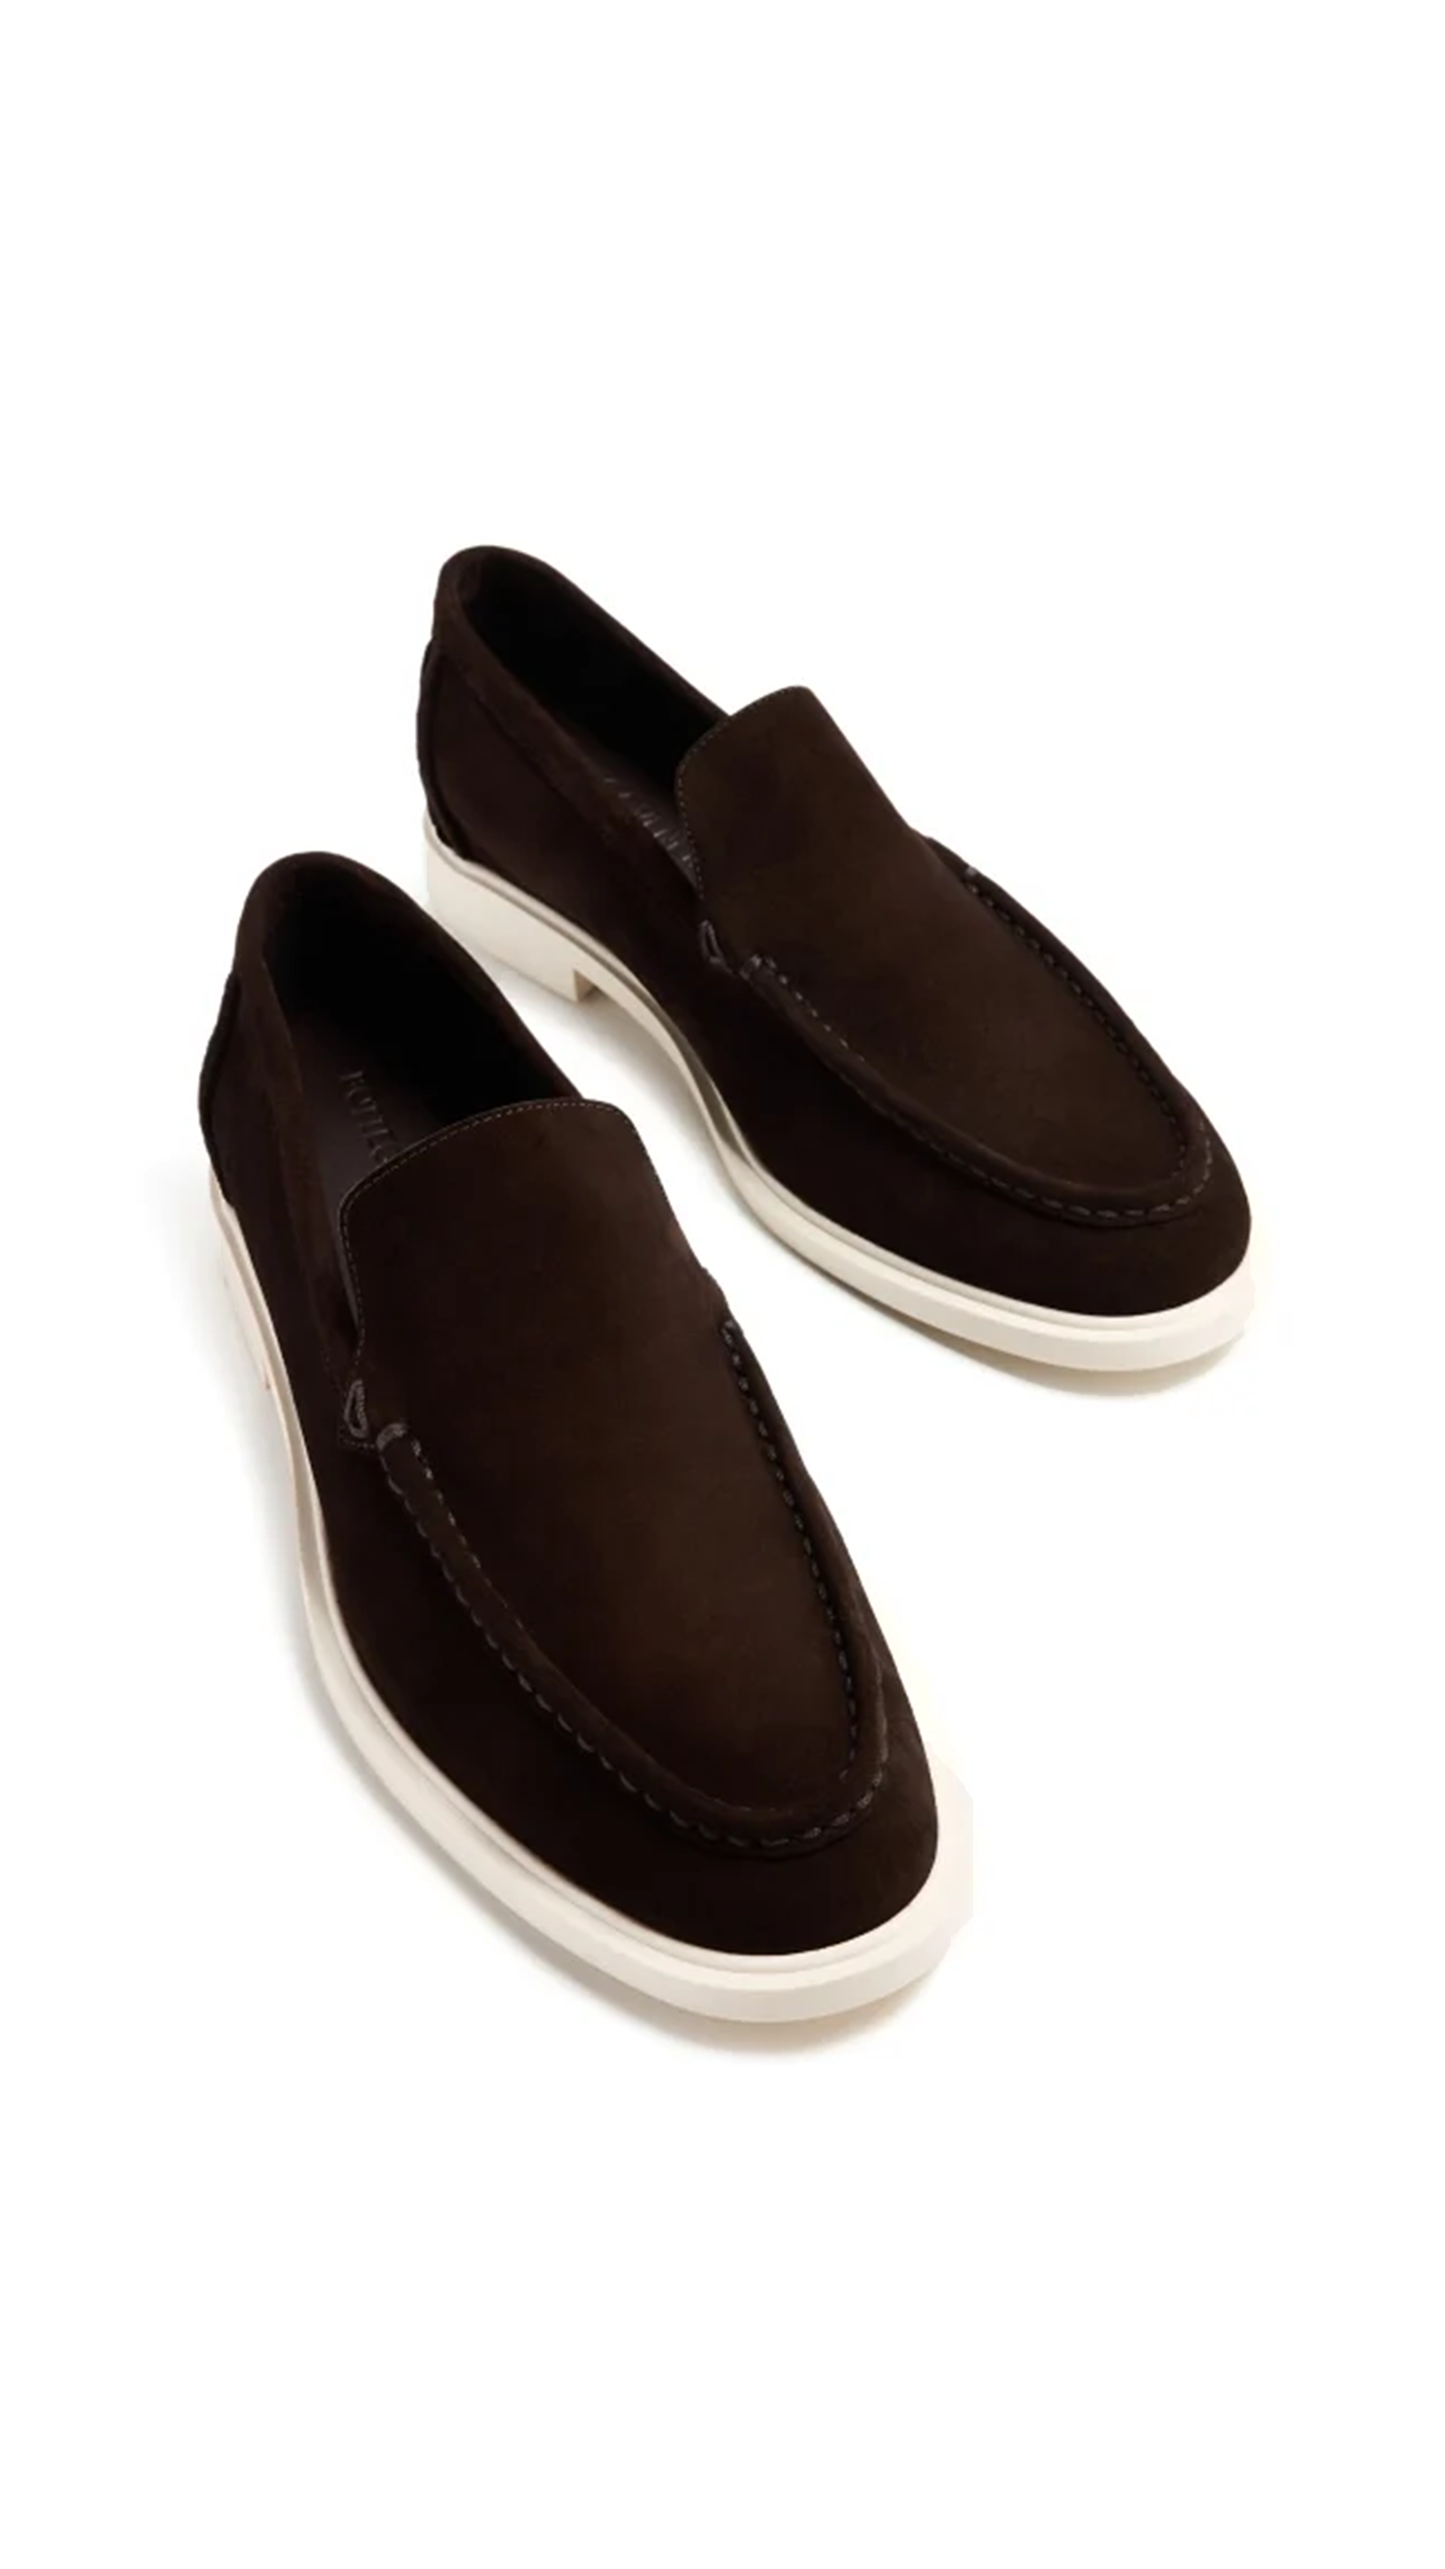 Suede Loafer - Cocoa